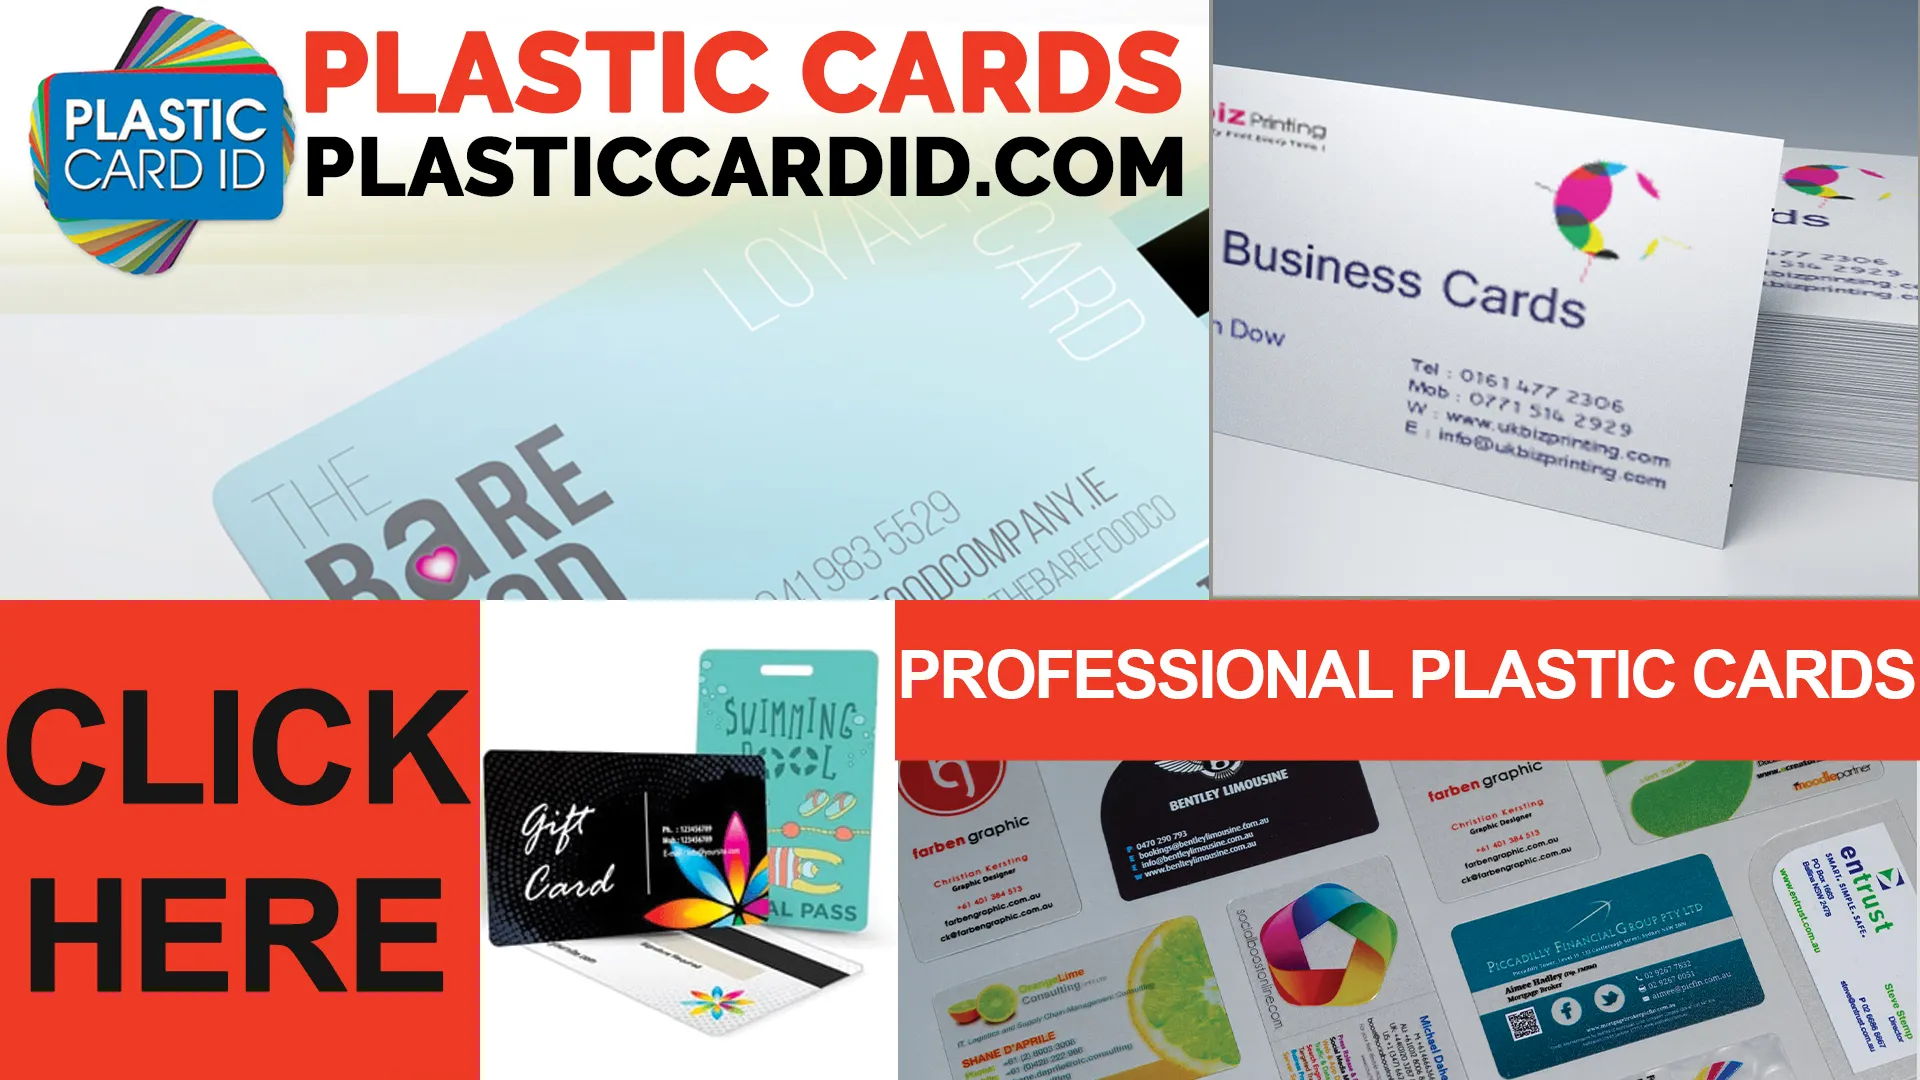 Extensive Range of Card Products and Services